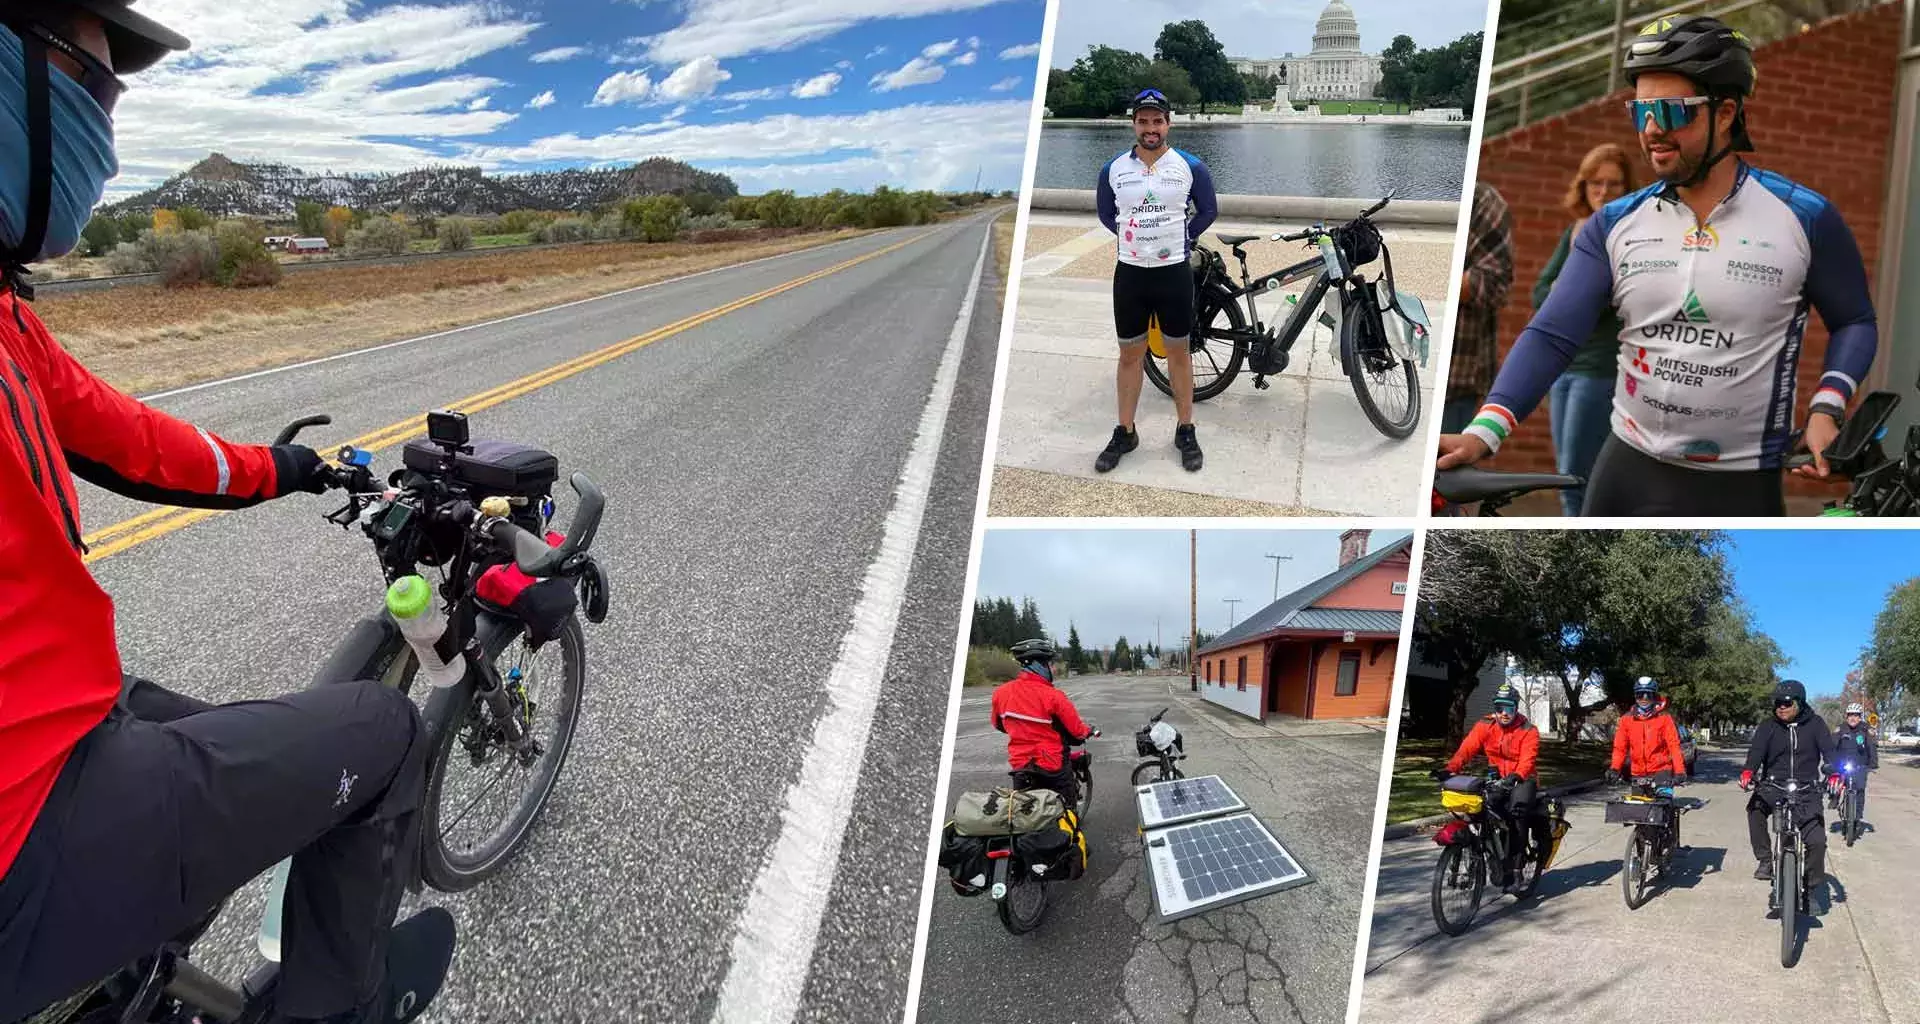 the Mexican who crossed the U.S. on an electric bicycle